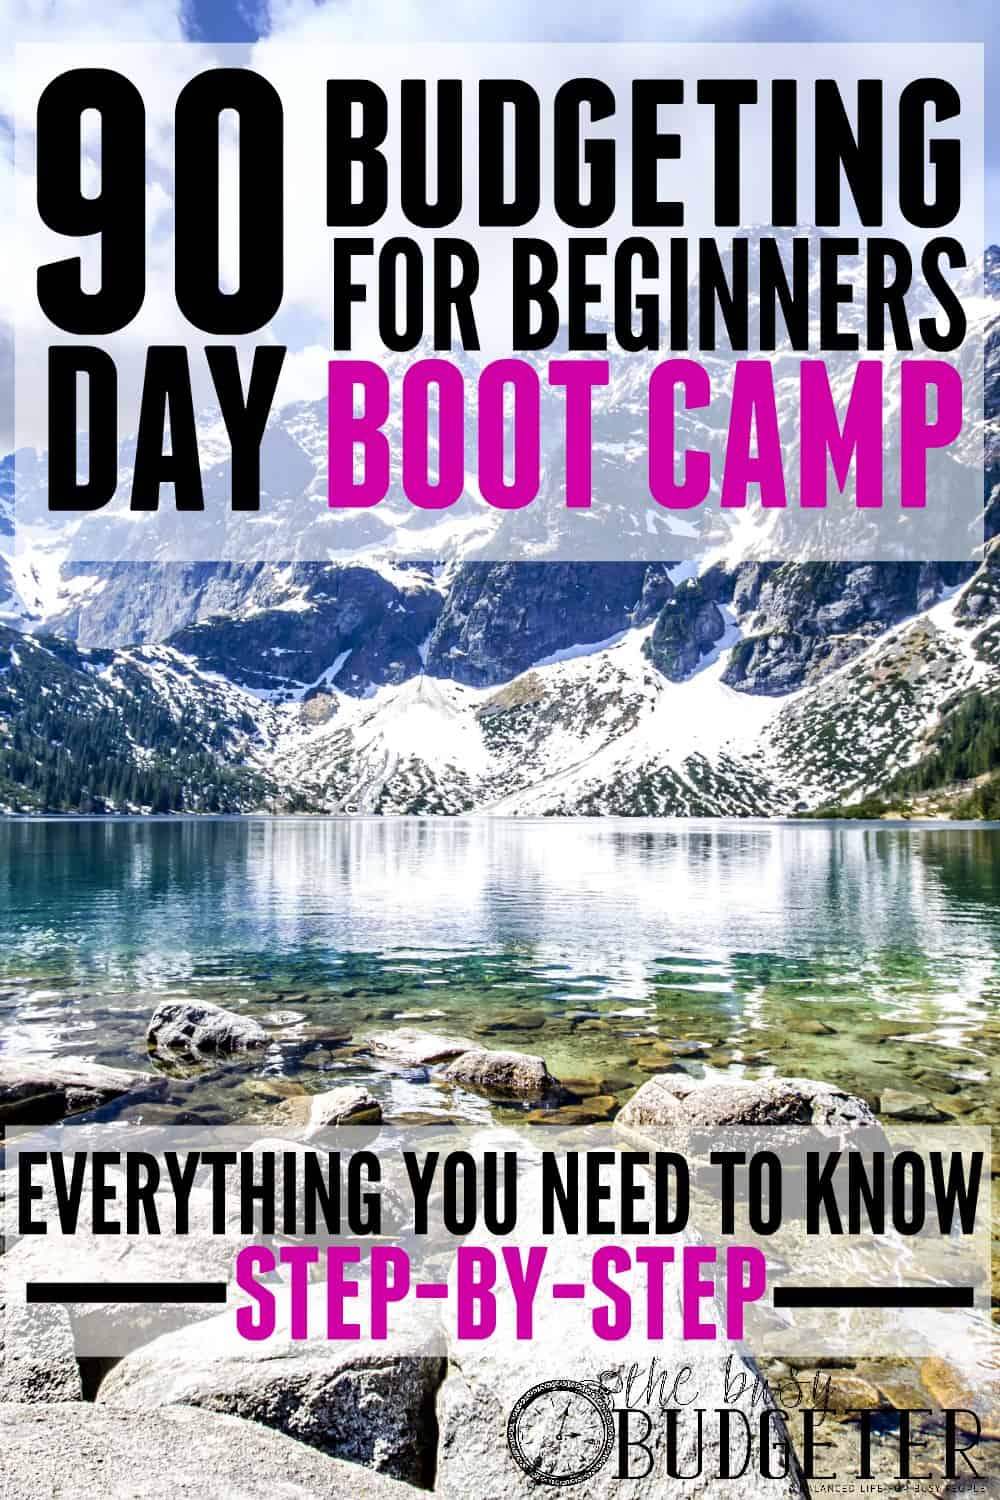 90 Day Budgeting for Beginners Boot Camp. This is amazing. I just cried reading it. I need this so bad. I'm hopeless trying to stick to a budget and having everything laid out step by step is making me super excited to rock our new budget! 